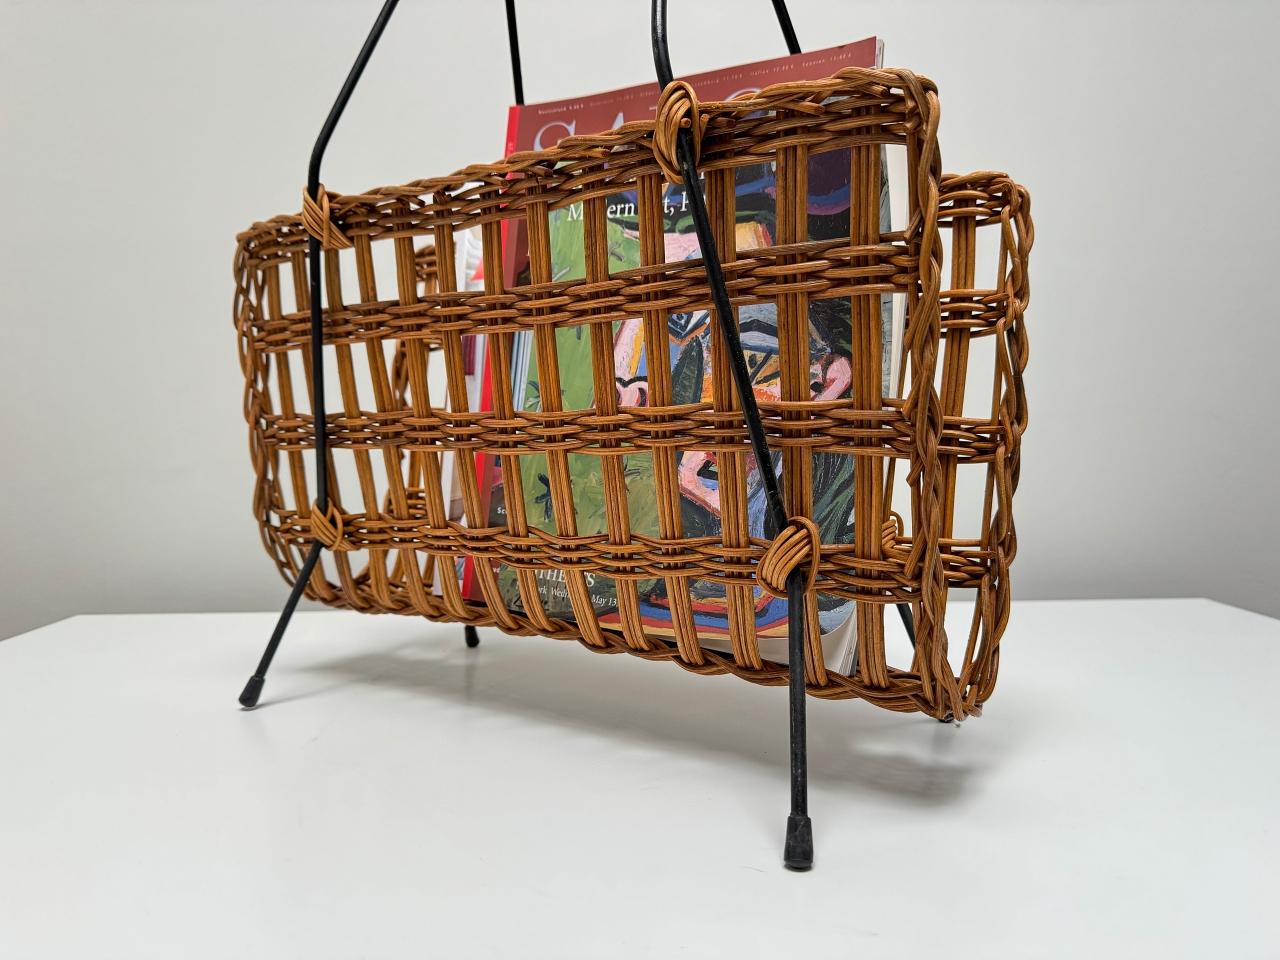 20th Century Jacques Adnet Wicker Magazine Rack, Black Iron Frame, 1950s, France For Sale